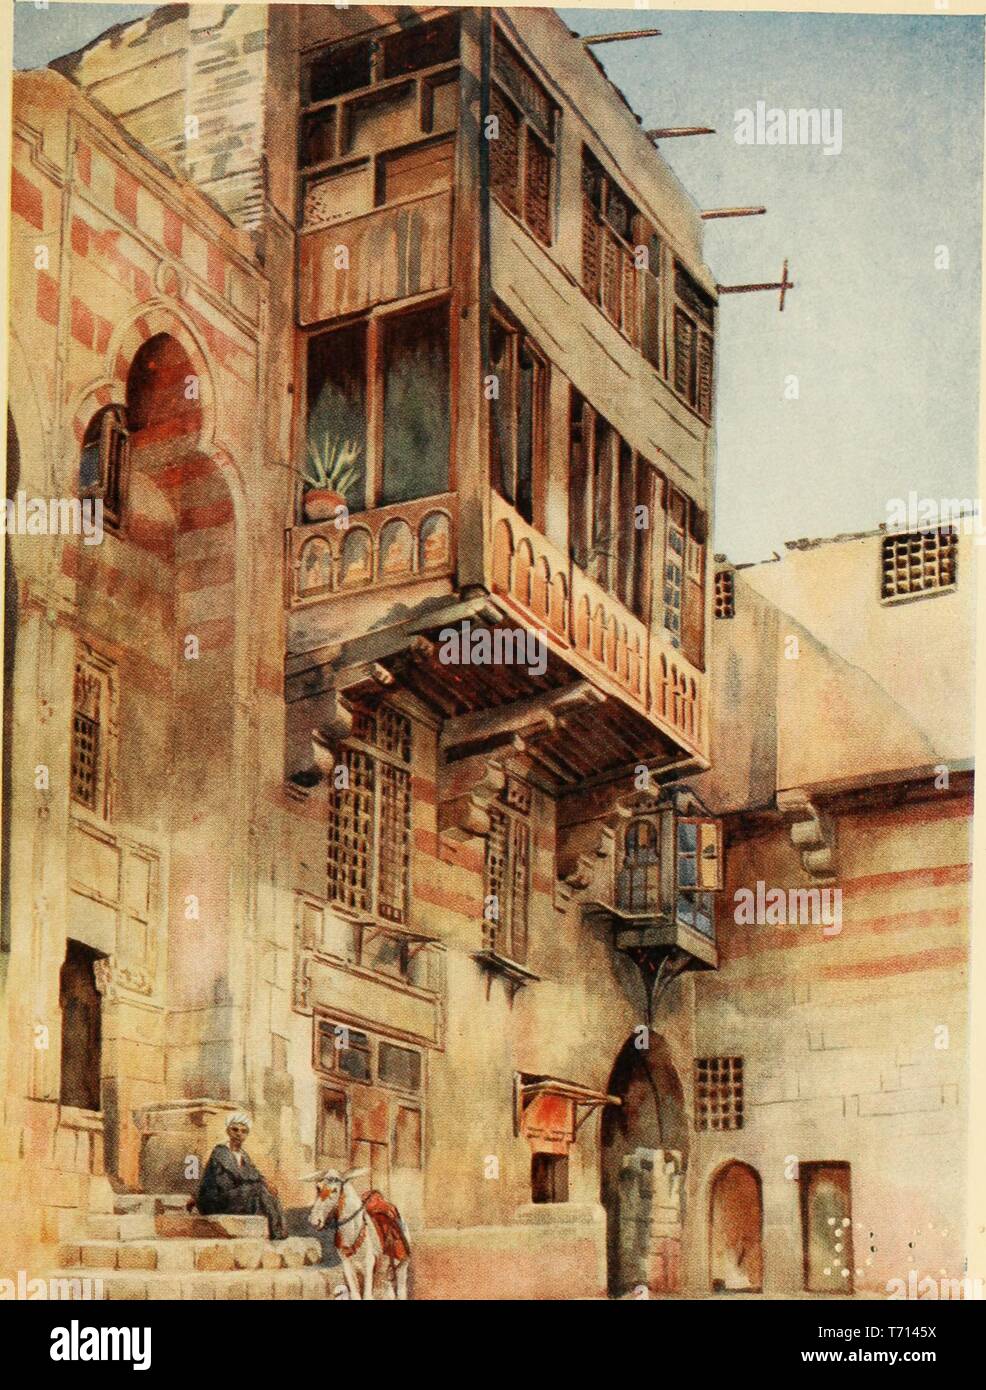 Watercolor painting 'An Old Palace in Cairo' by Walter Spencer Stanhope Tyrwhitt, from the book 'Cairo, Jerusalem, and Damascus' by David Samuel, 1912. Courtesy Internet Archive. () Stock Photo